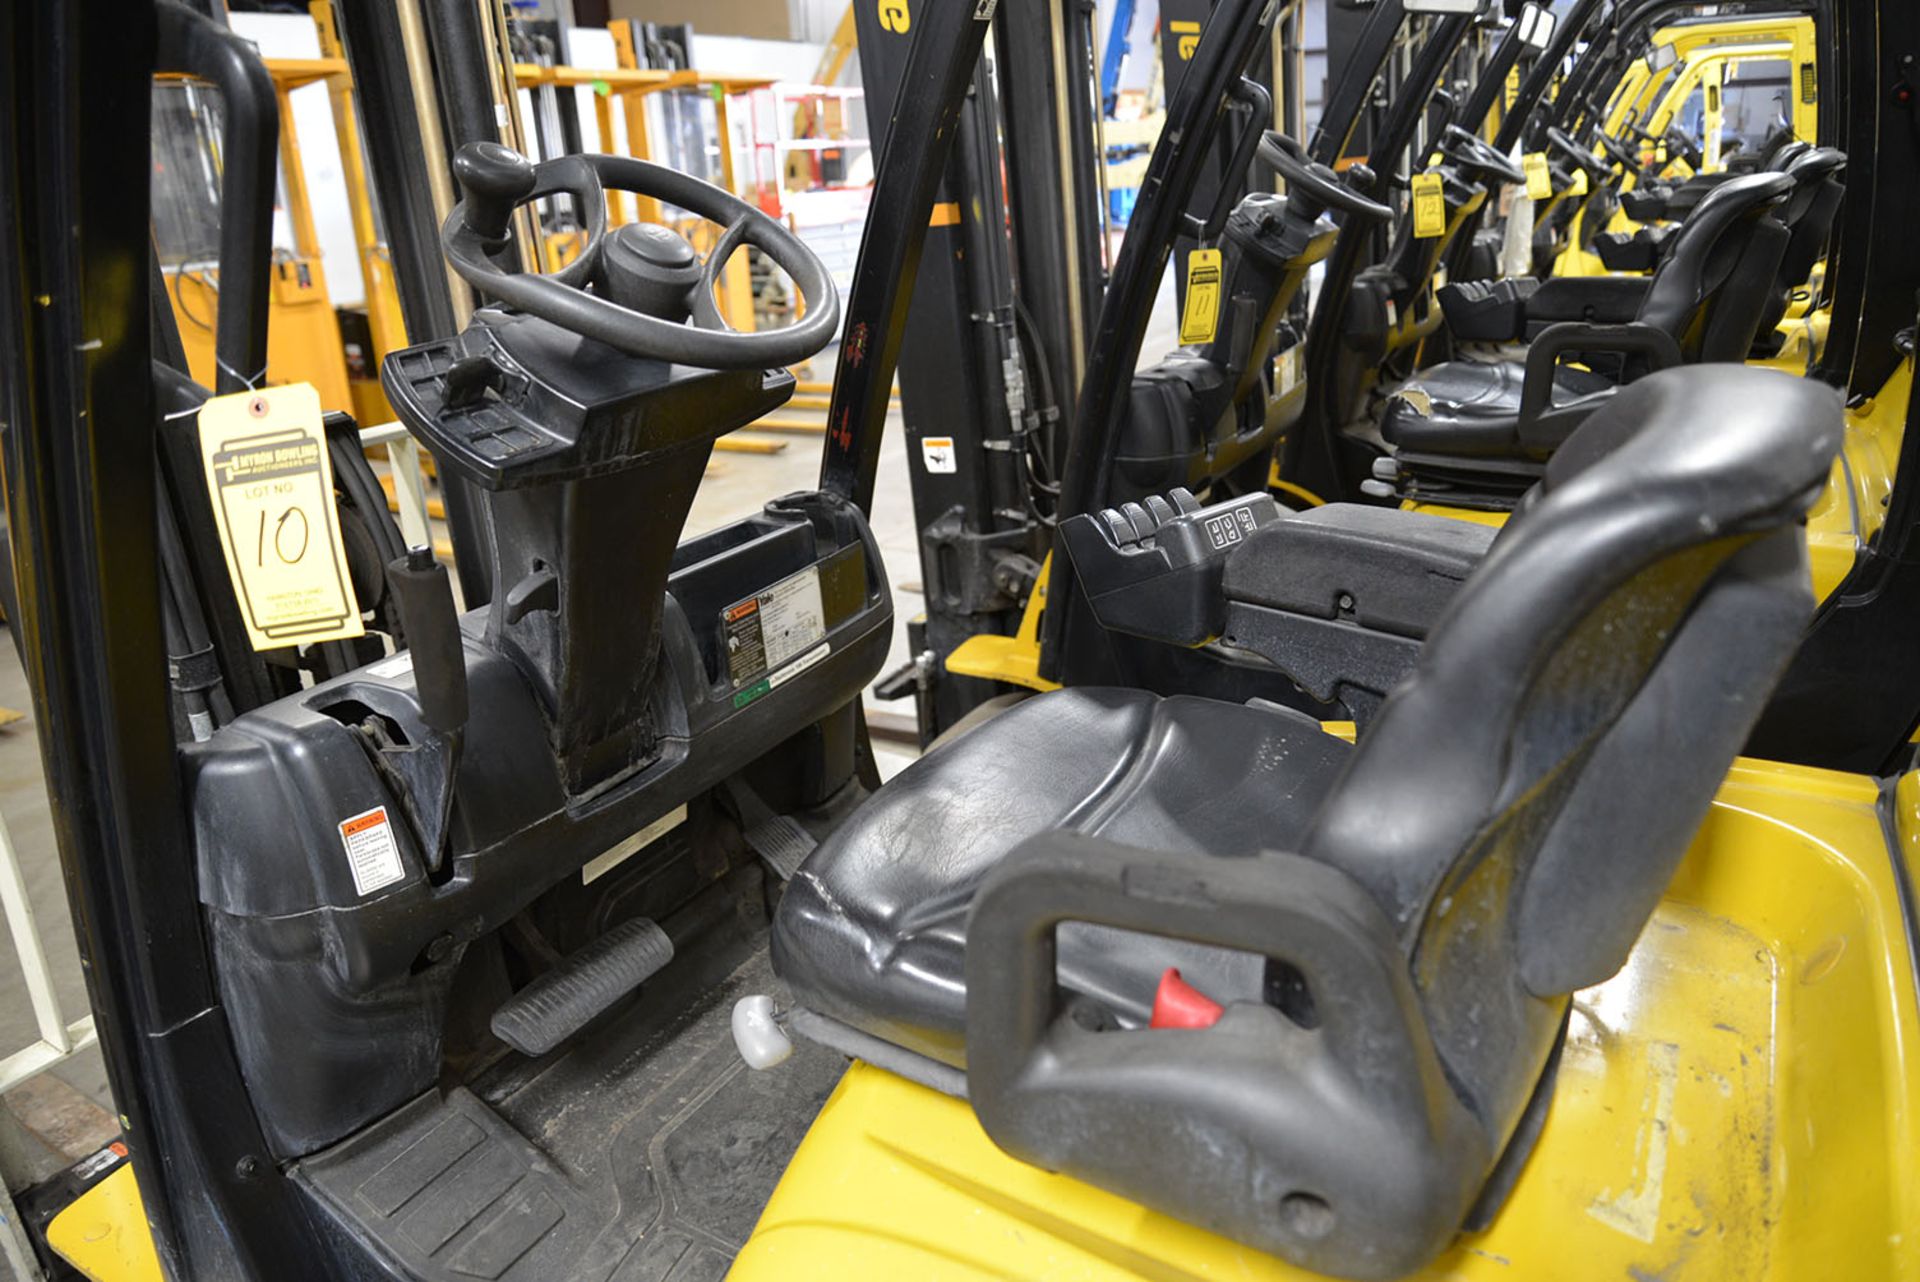 2008 YALE 5,000-lb. Capacity Forklift, Model GLC050VXNV, S/N A910V13935F, LPG, Solid Non-Marking - Image 6 of 7